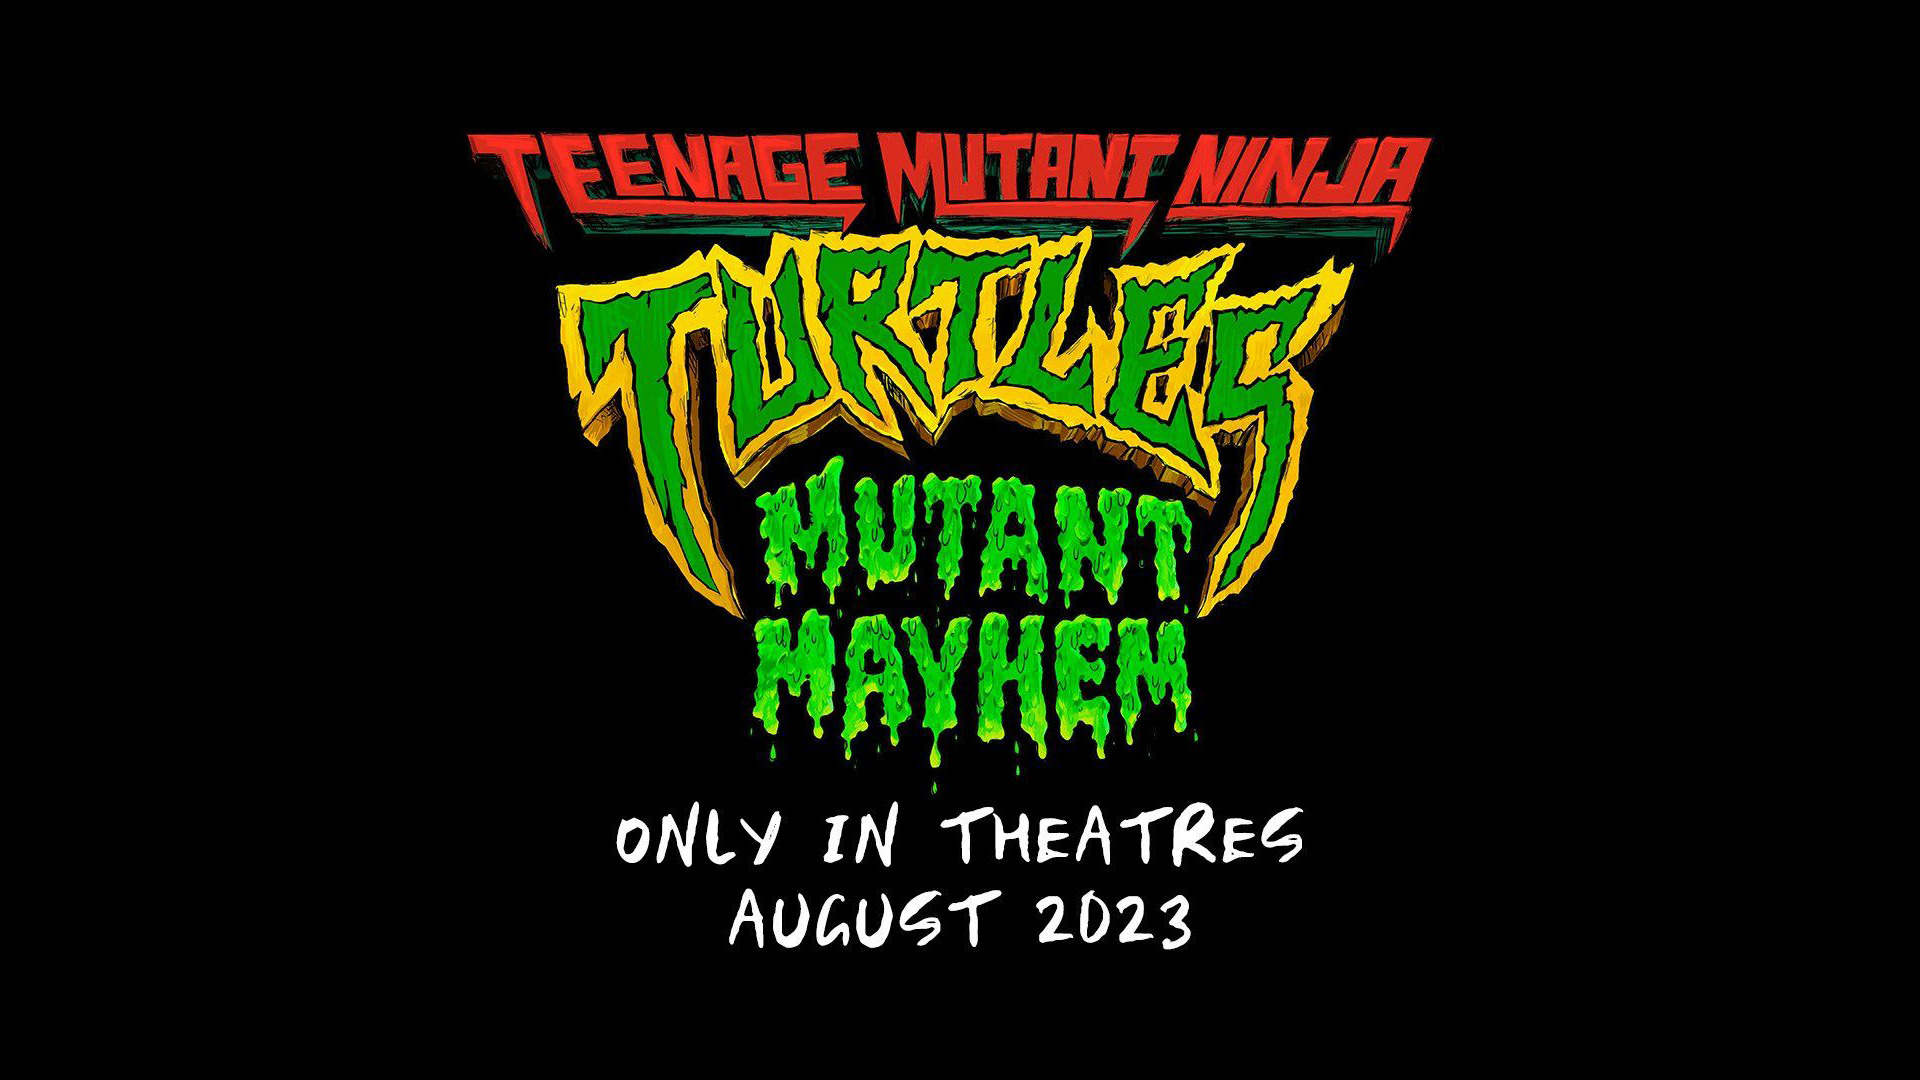 Nickelodeon joins forces with Mikros animation to reimagine the iconic teenage mutant ninja turtles